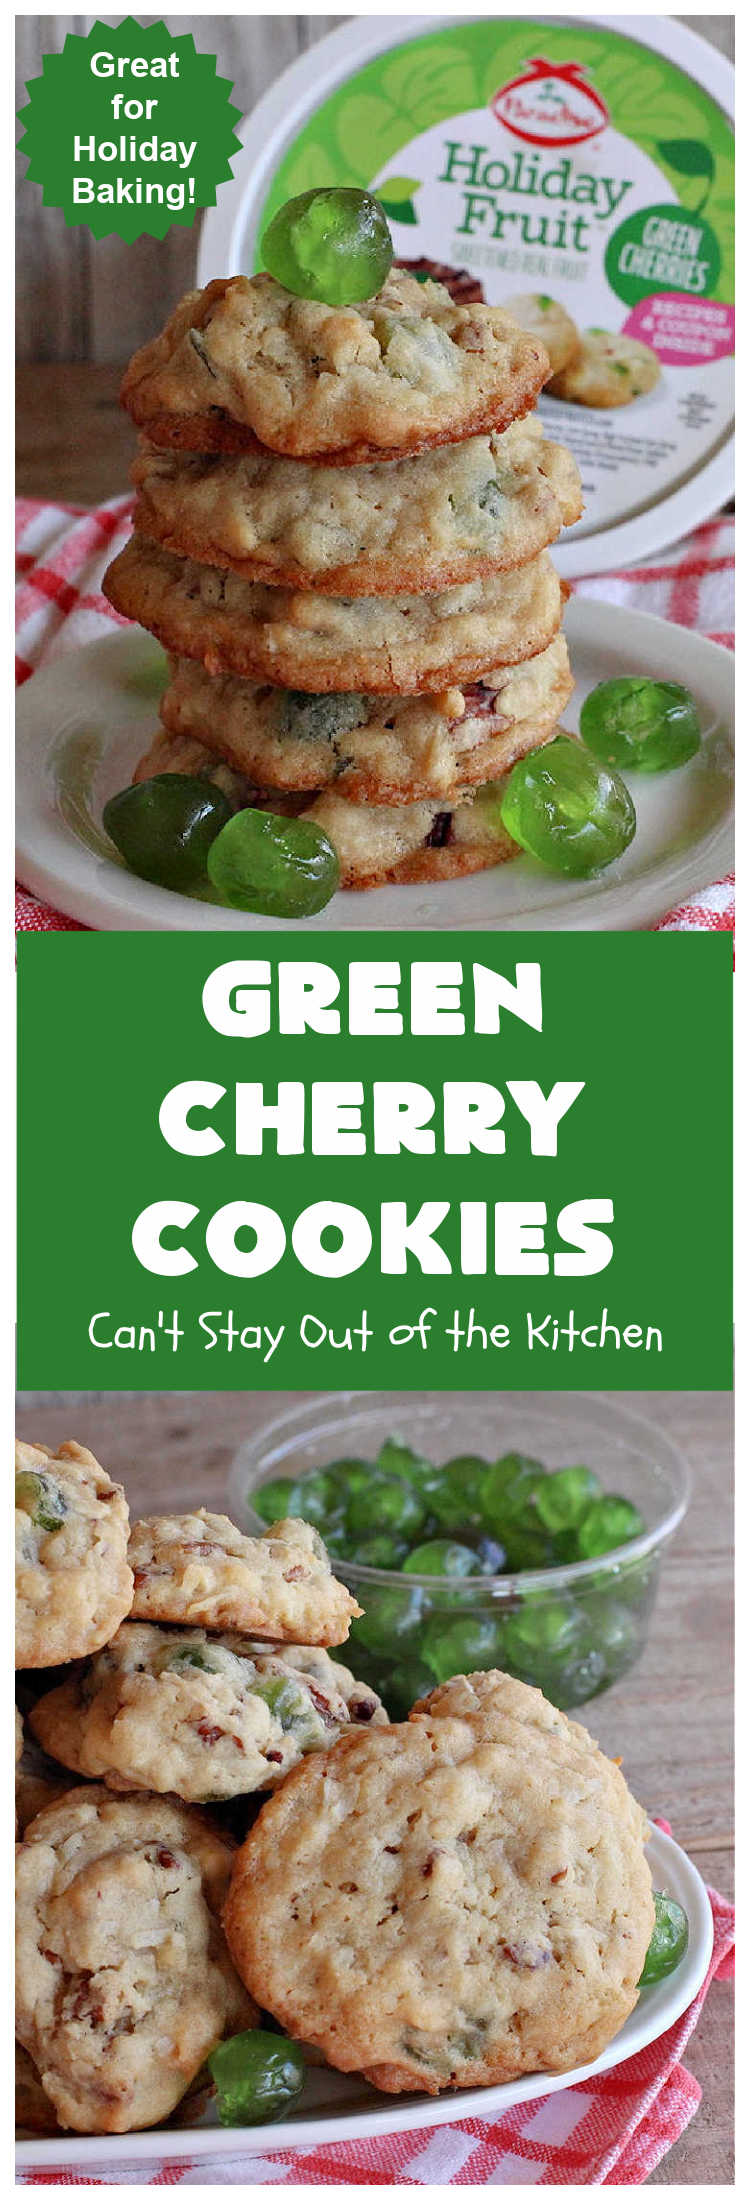 Green Cherry Cookies | Can't Stay Out of the Kitchen | these festive #cookies are terrific for #holiday #baking & parties, a #ChristmasCookieExchange or even potlucks! #GreenCherries, #pecans & #coconut combine for a fantastic #dessert that everyone will love. #CherryDessert #HolidayDessert #ParadiseFruitCompany #ParadiseCandiedFruit #GreenCherryCookies